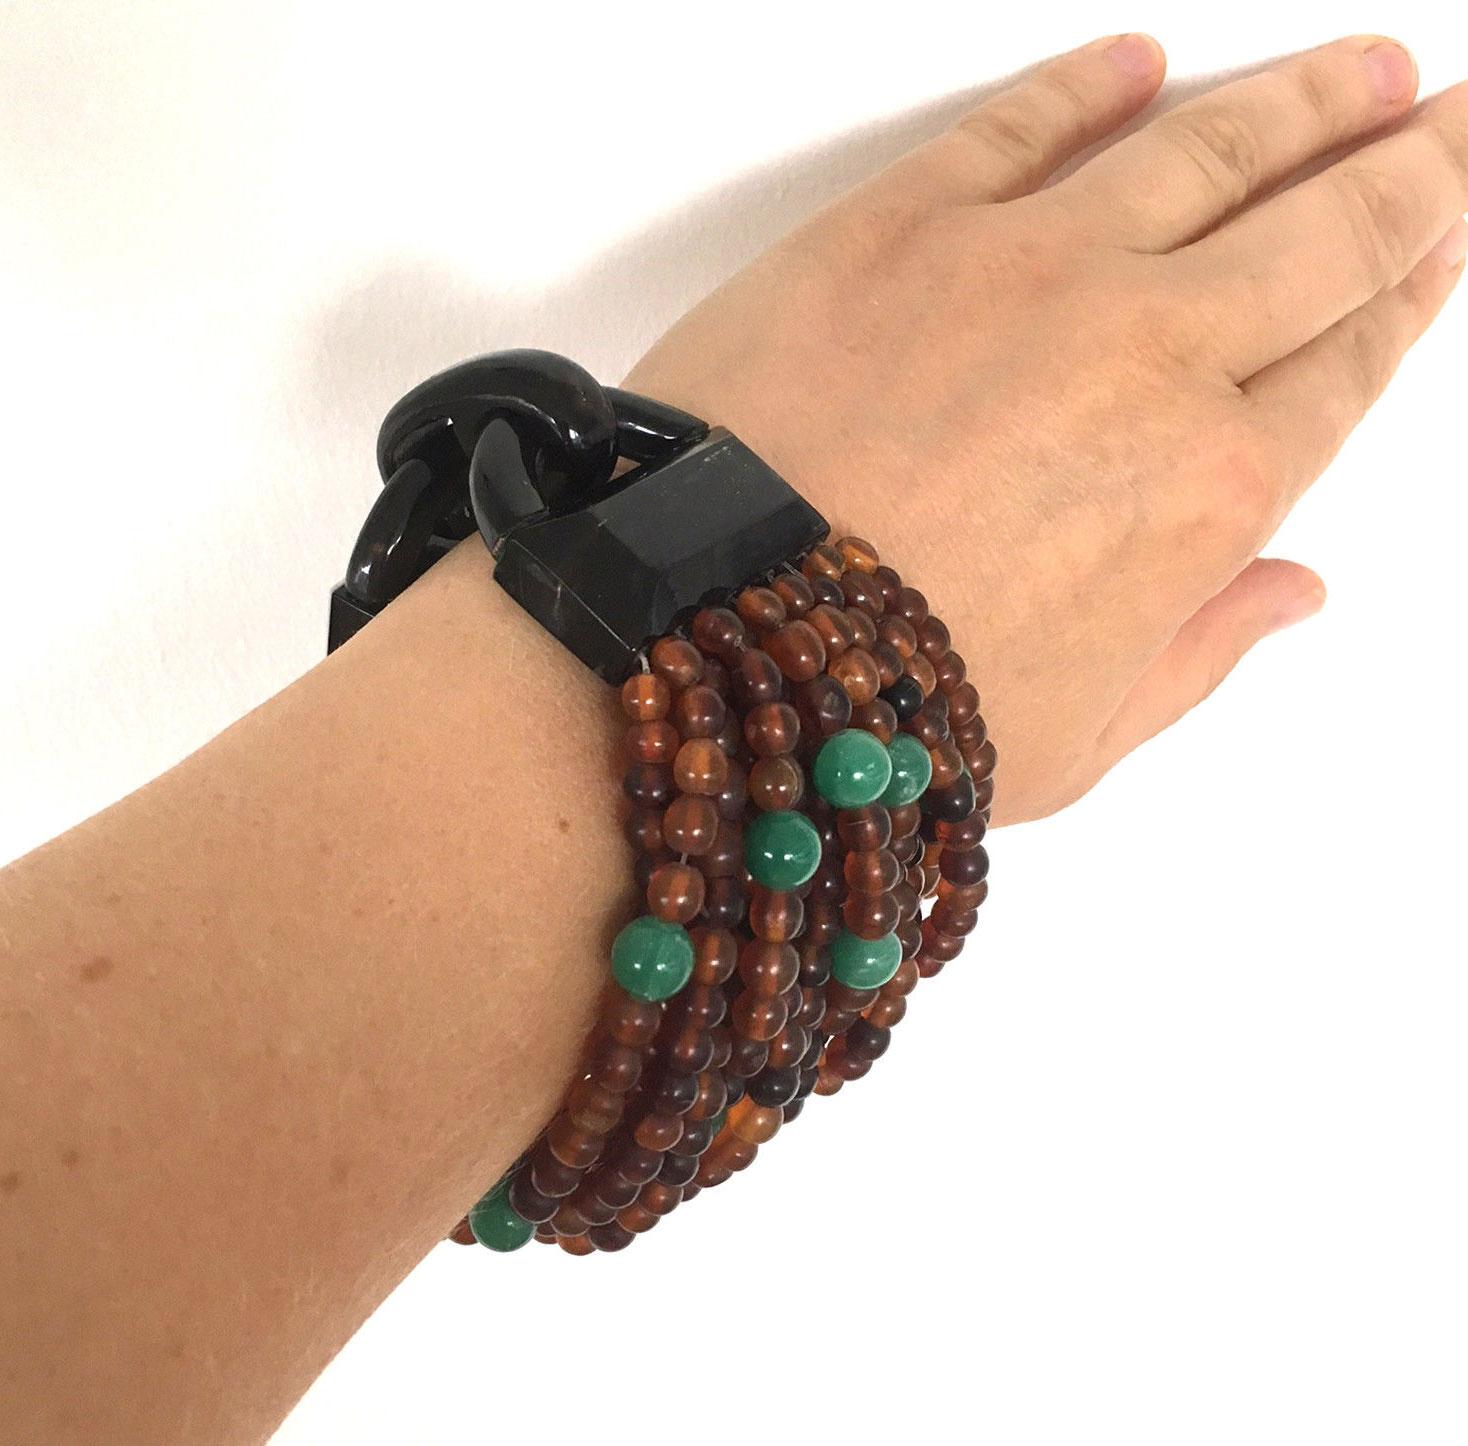 Designer Bracelet by husband and wife team Gerda Lynggaard & Nikolai Monies of Copenhagen Denmark, known for large scale high end costume jewelry incorporating natural materials; Rows and rows of rich Natural Horn Beads are gathered with an Iconic